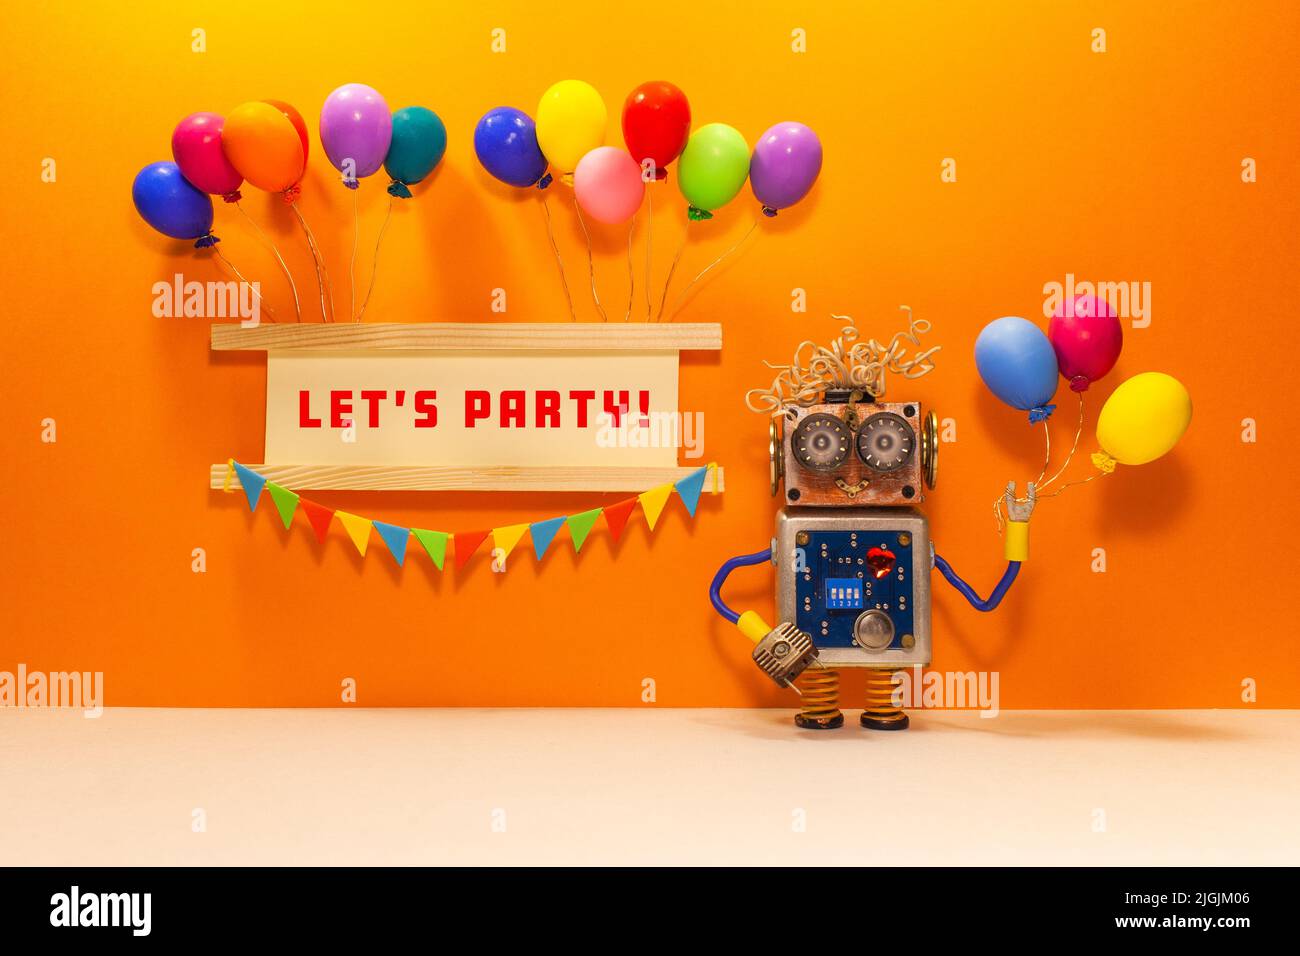 Invitation motivation card. Robot toy with balloons. Festive banner decorated with balloons, garland flags and quote Let's party. orange beige backgro Stock Photo